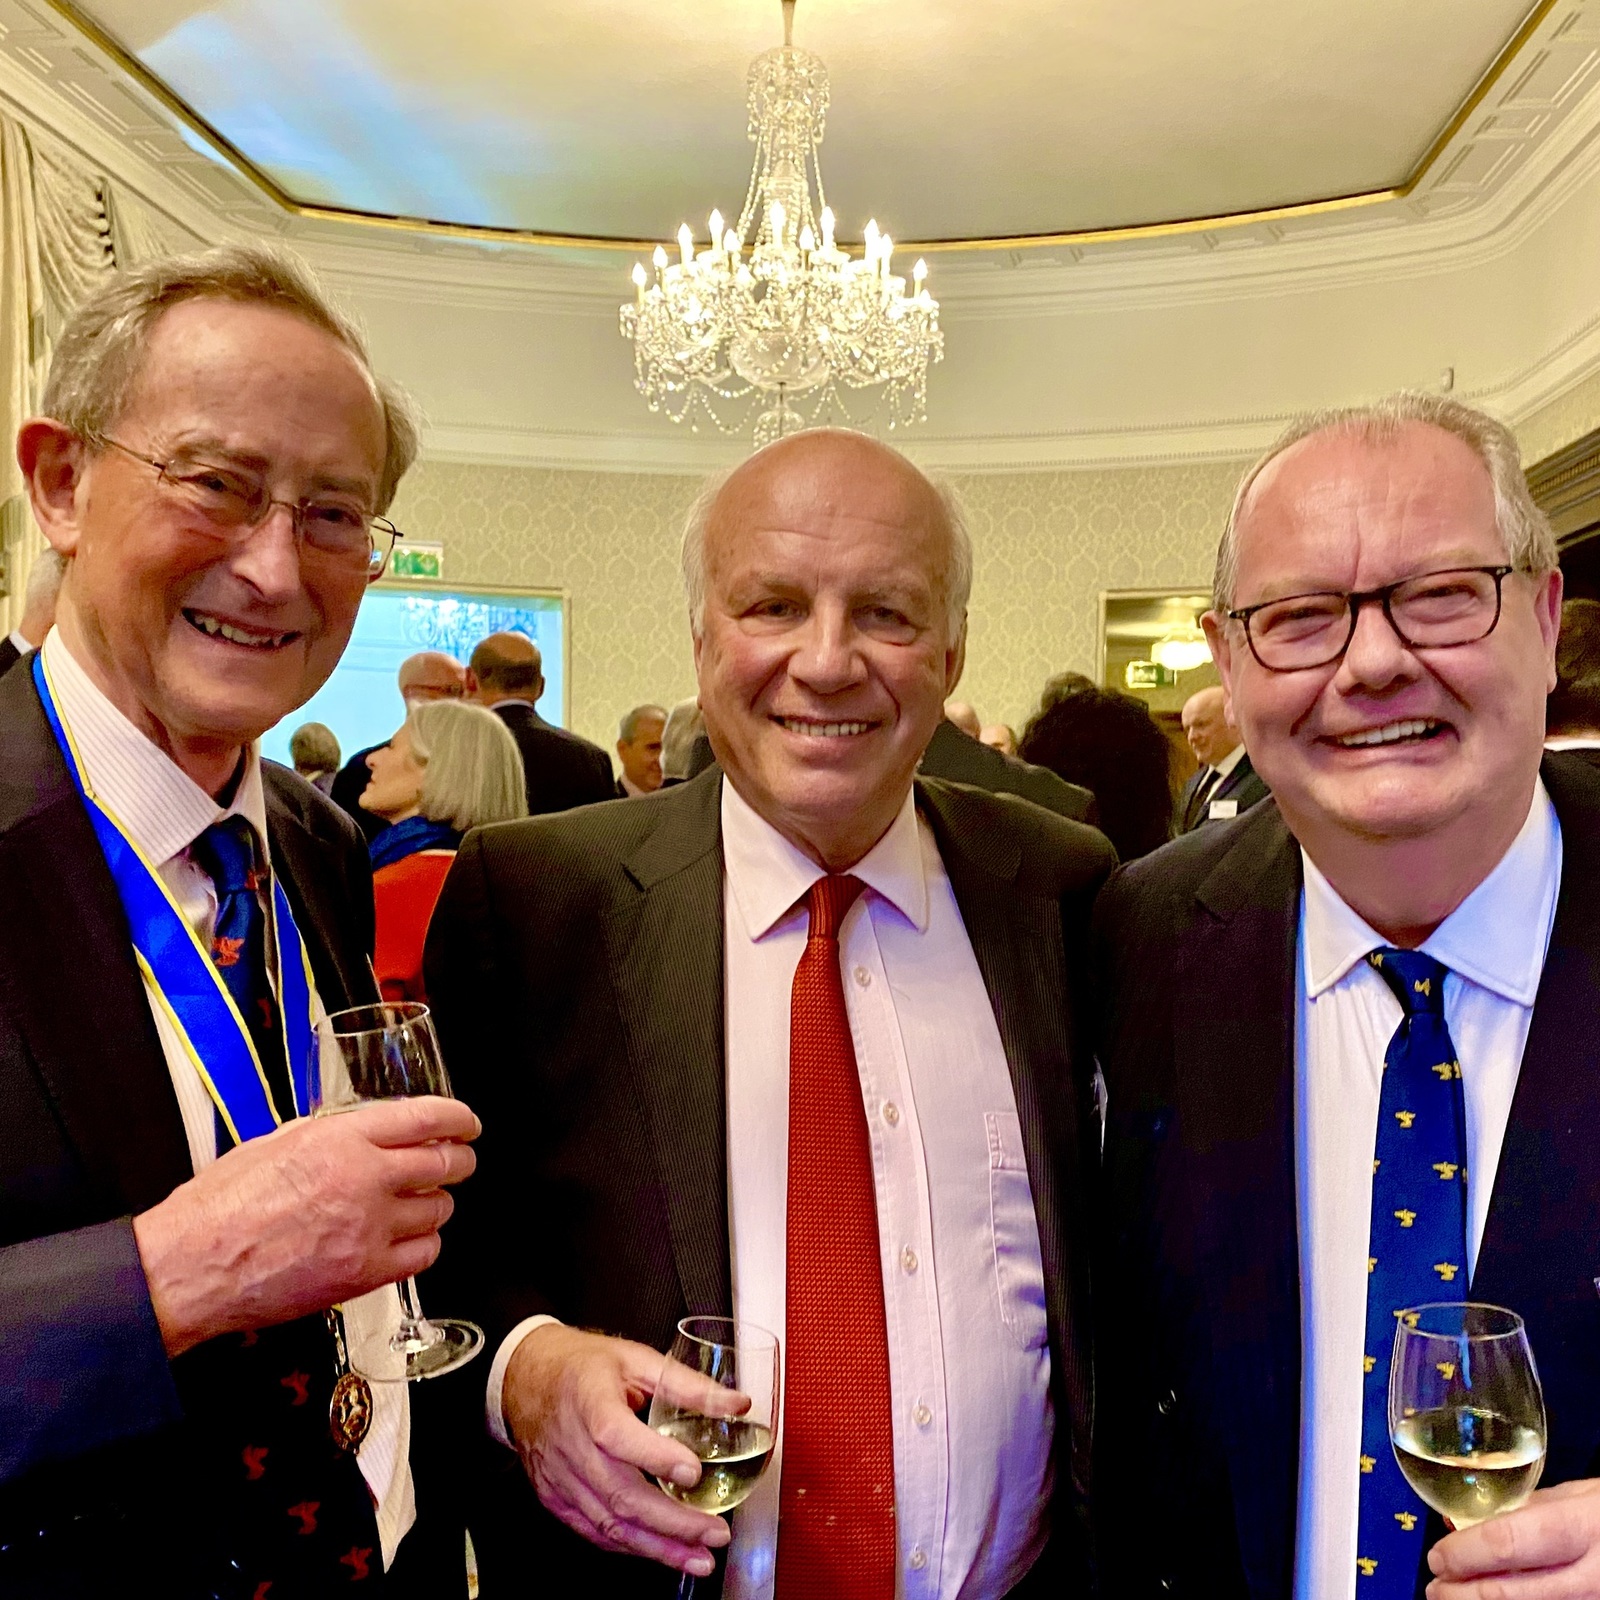 With Greg Dyke and Past Master Ian Locks at Stationers' Company Annual Lecture and Dinner at Carpenter’s Hall